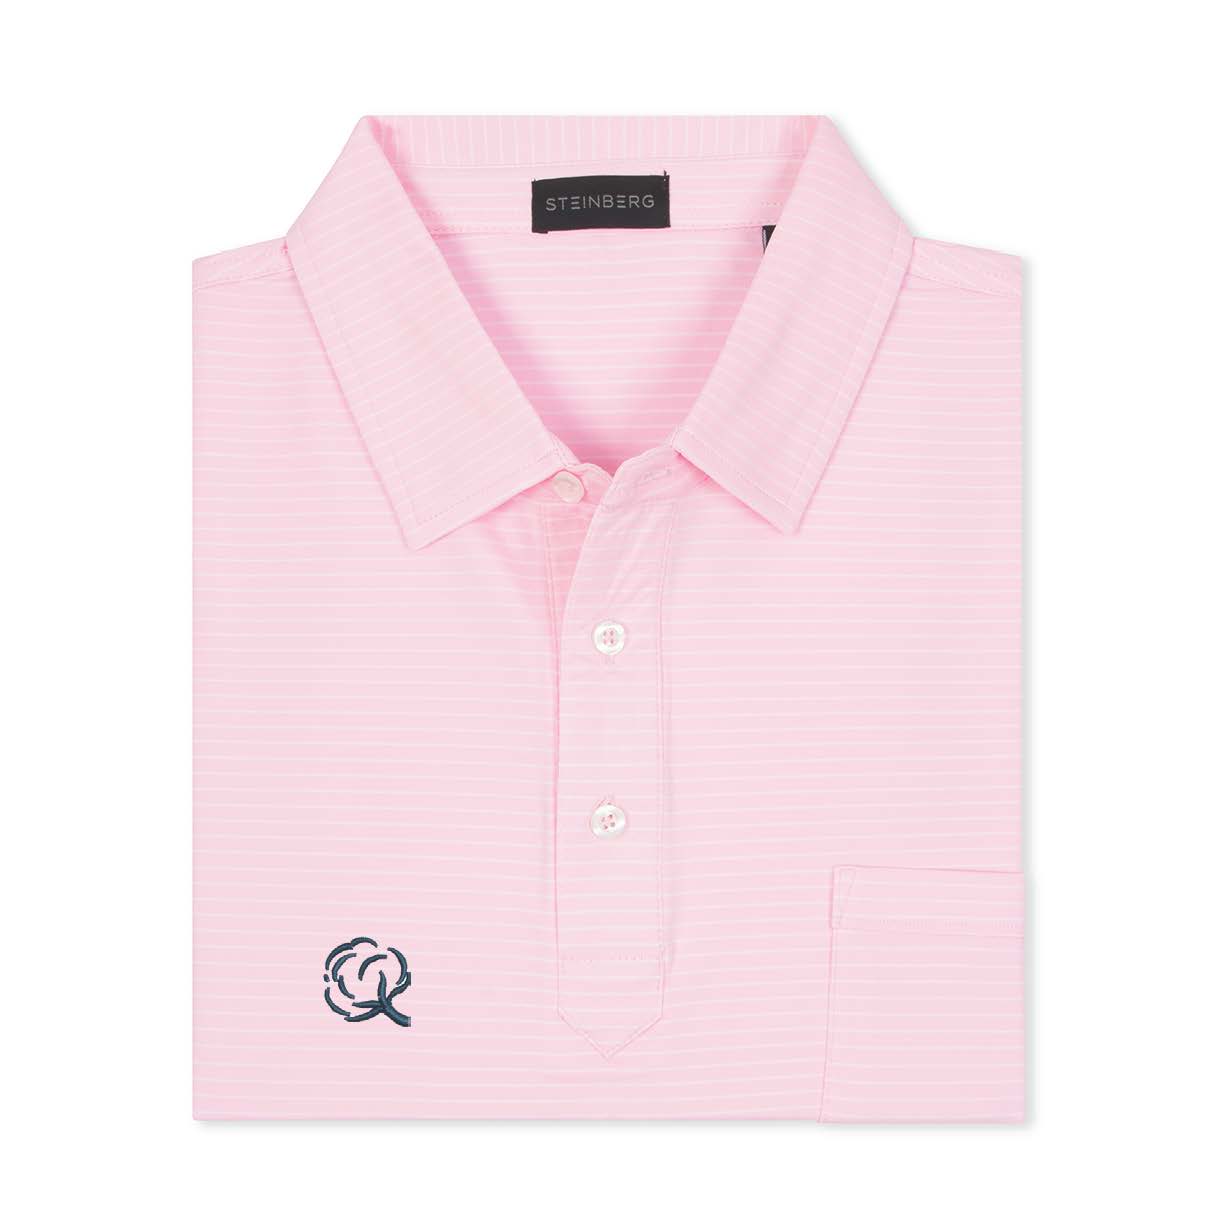 The Loft Performance Polo Cotton Collection